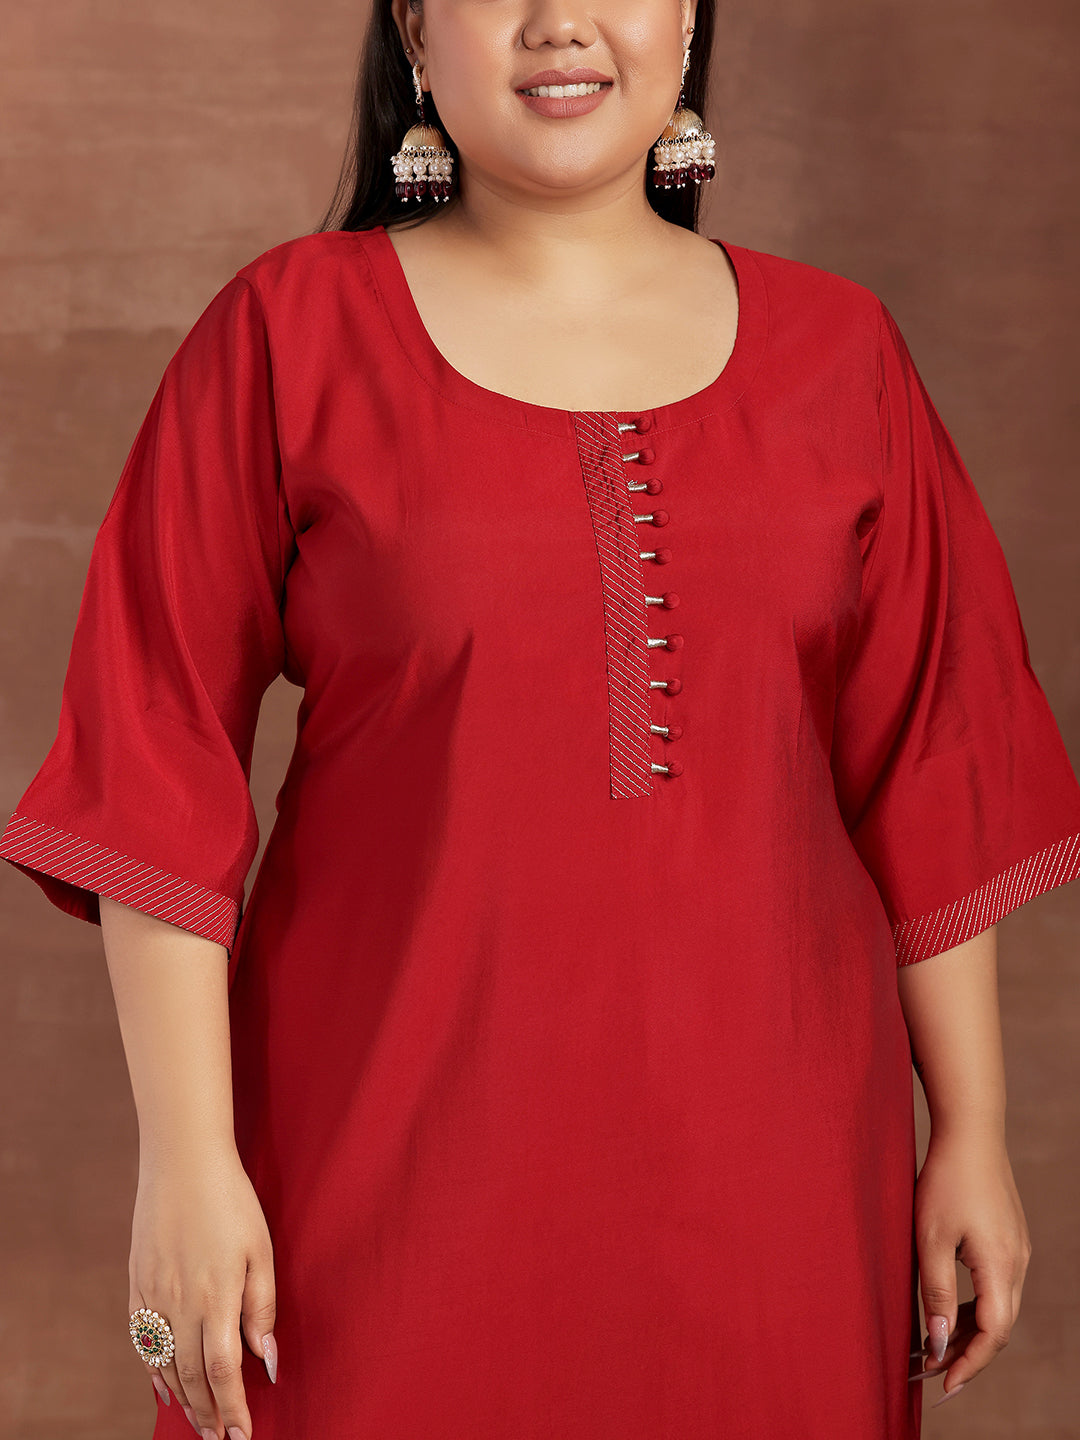 Plus Size Red Solid Silk Blend Straight Suit With Dupatta